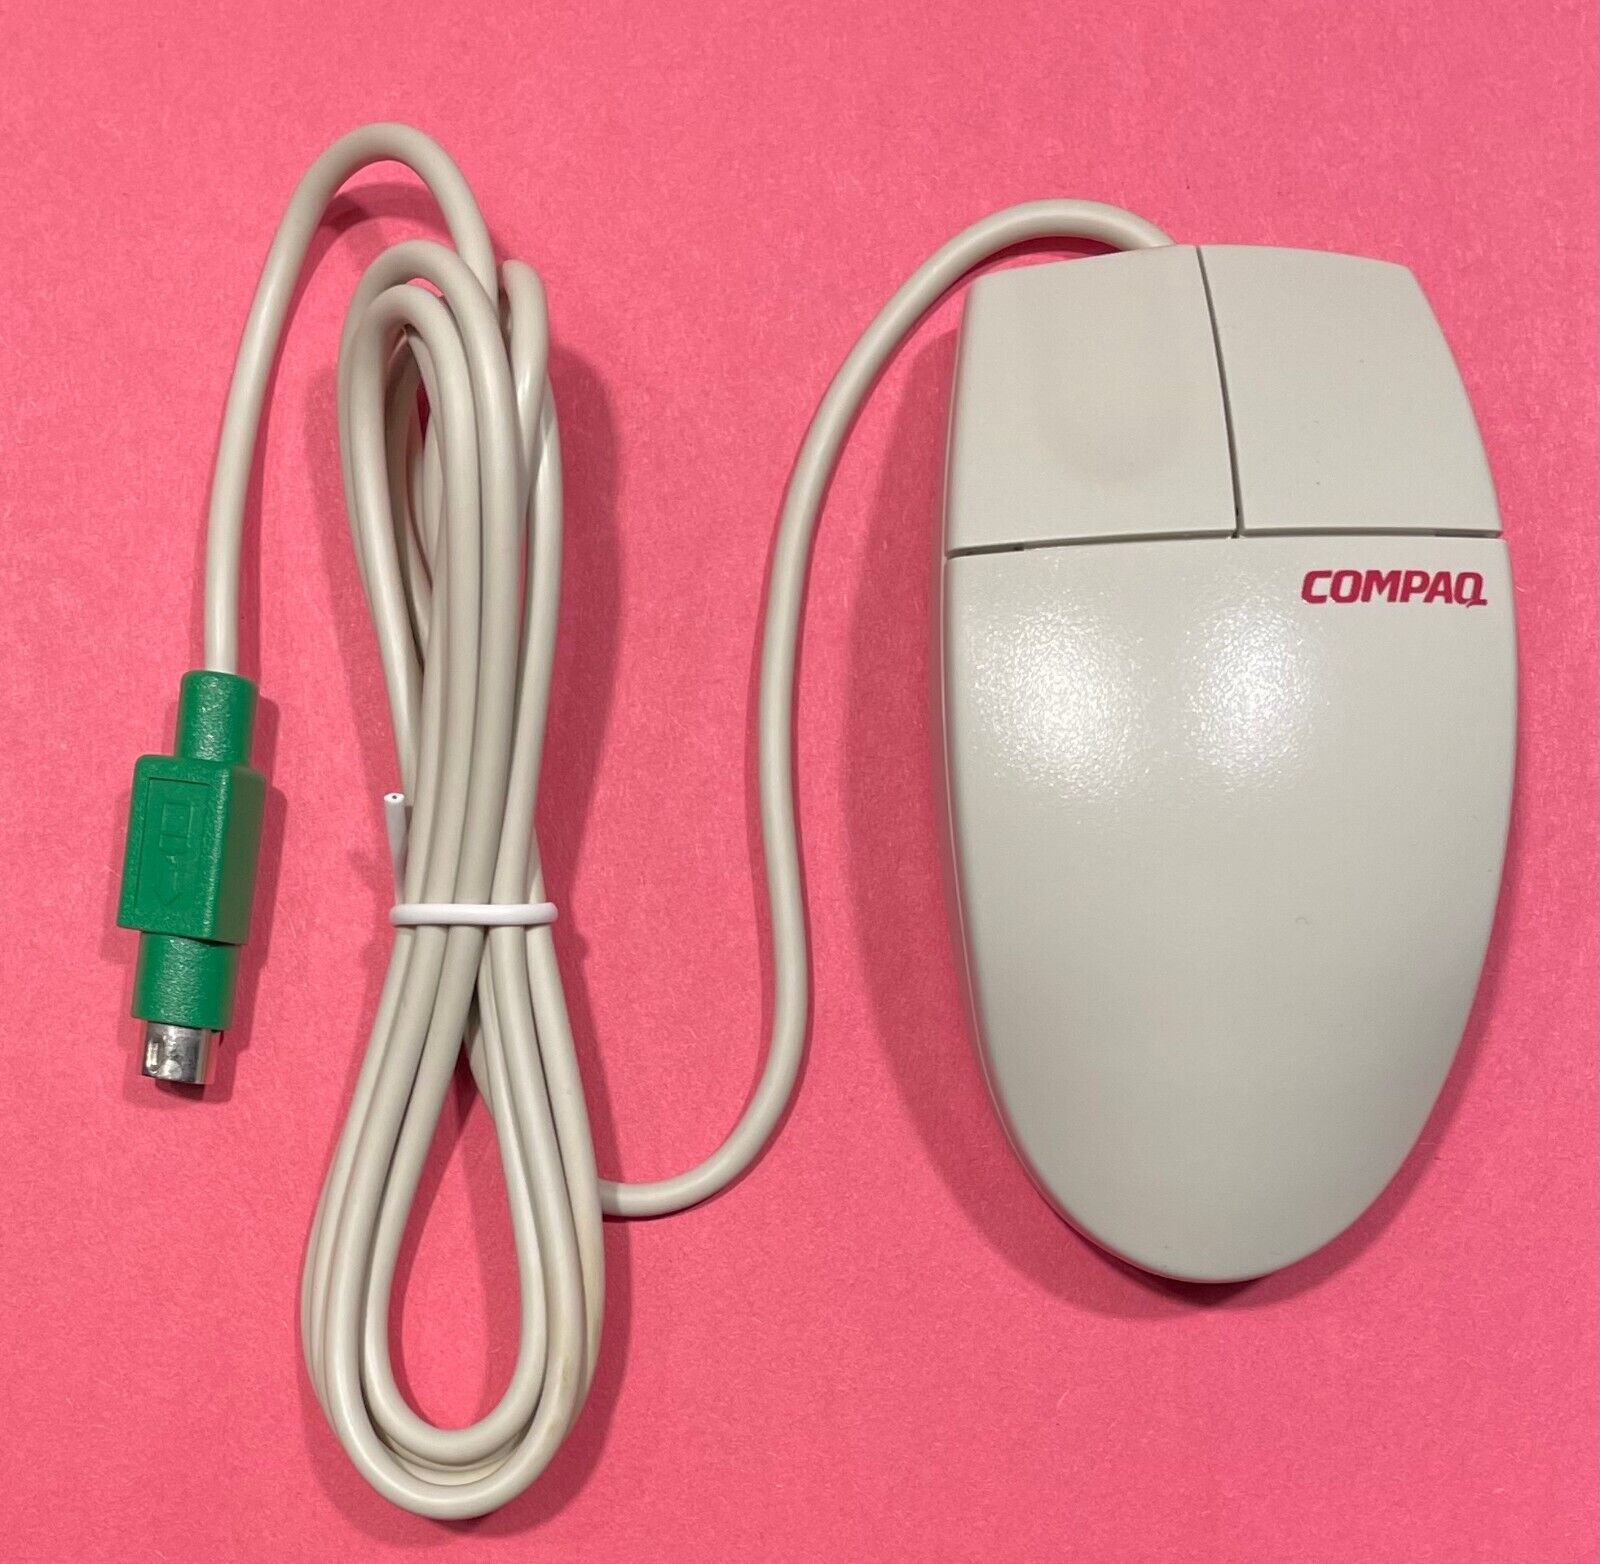 NEW OEM Vintage Compaq PS2 Beige M-S34 141189-401 Computer Mouse Trackball ball